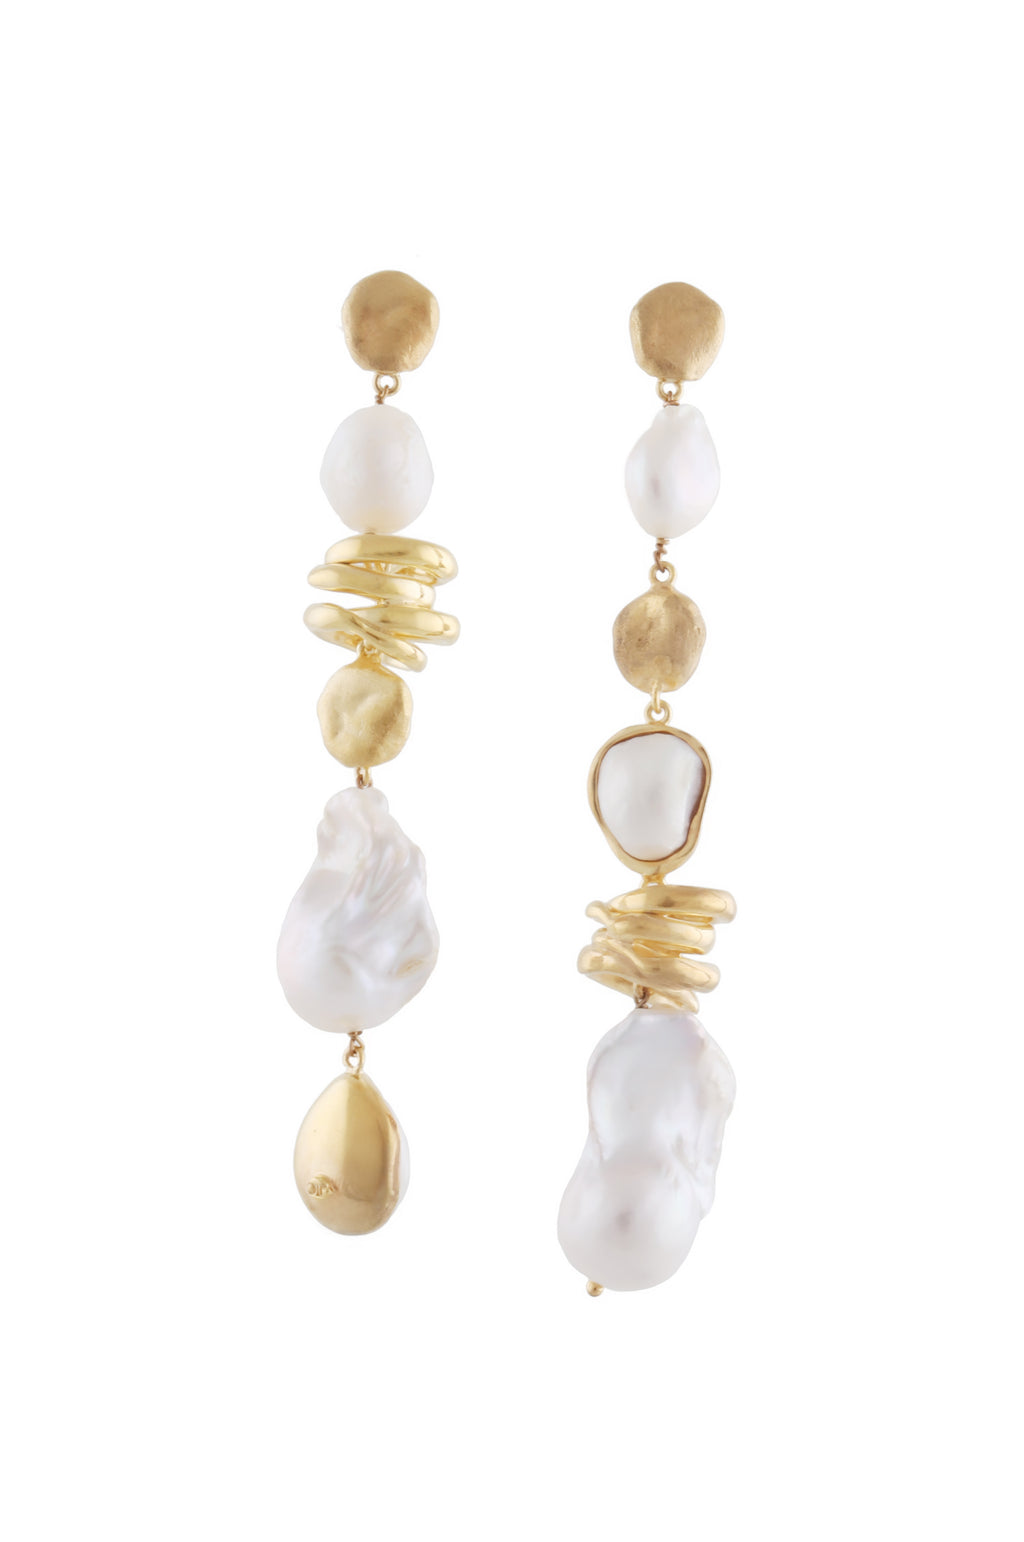 MISMATCHED PEARL DANGLING EARRINGS